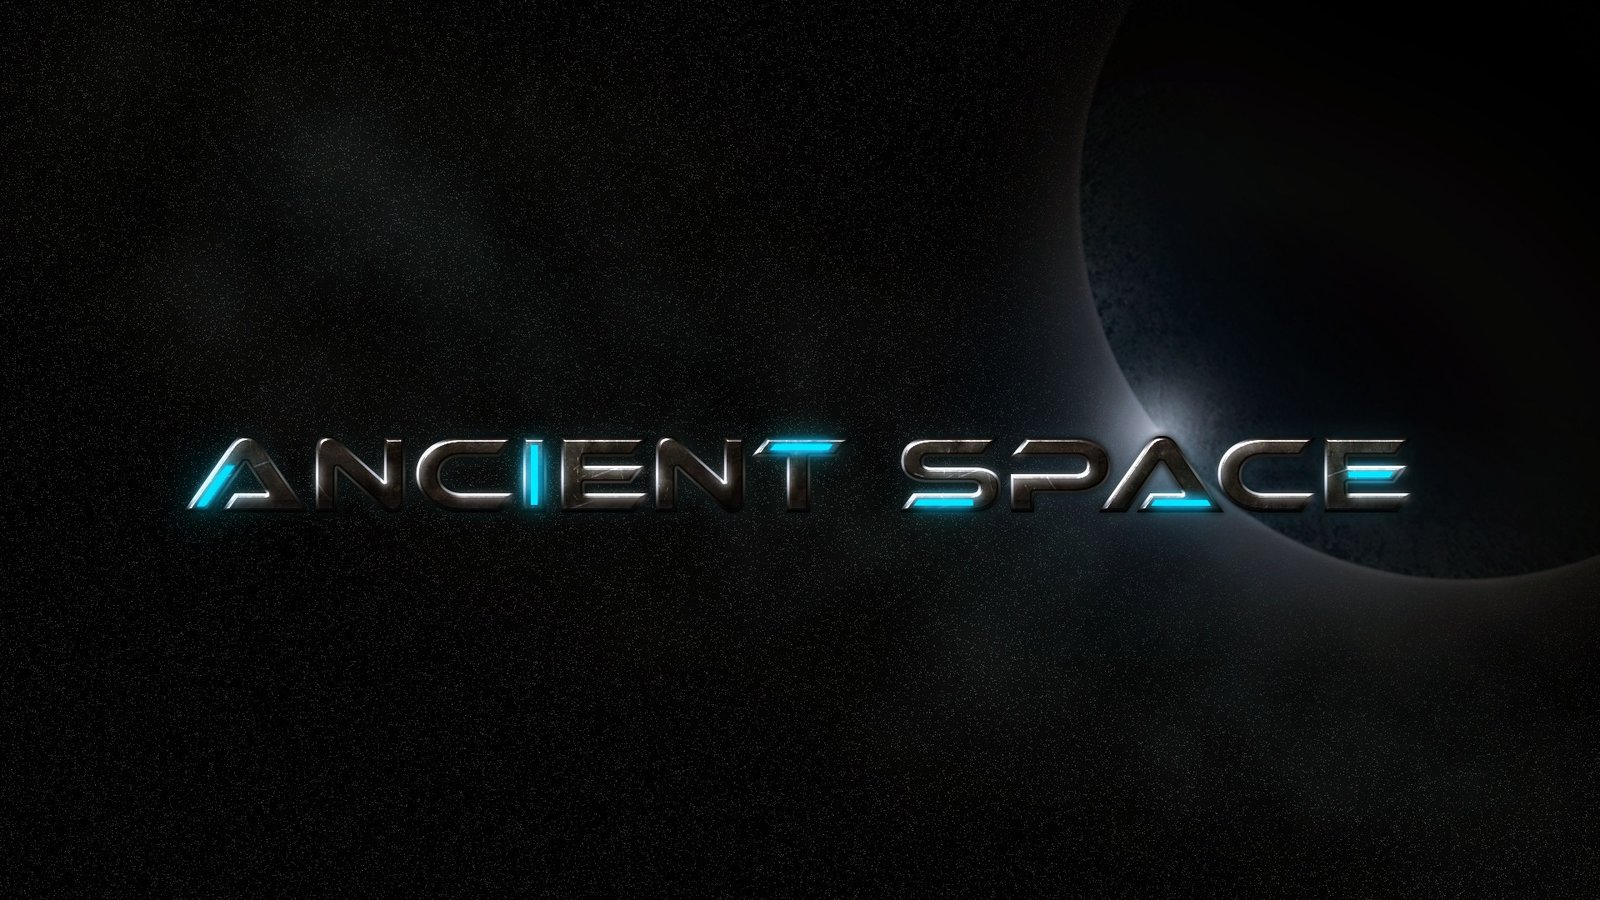 Ancient Space